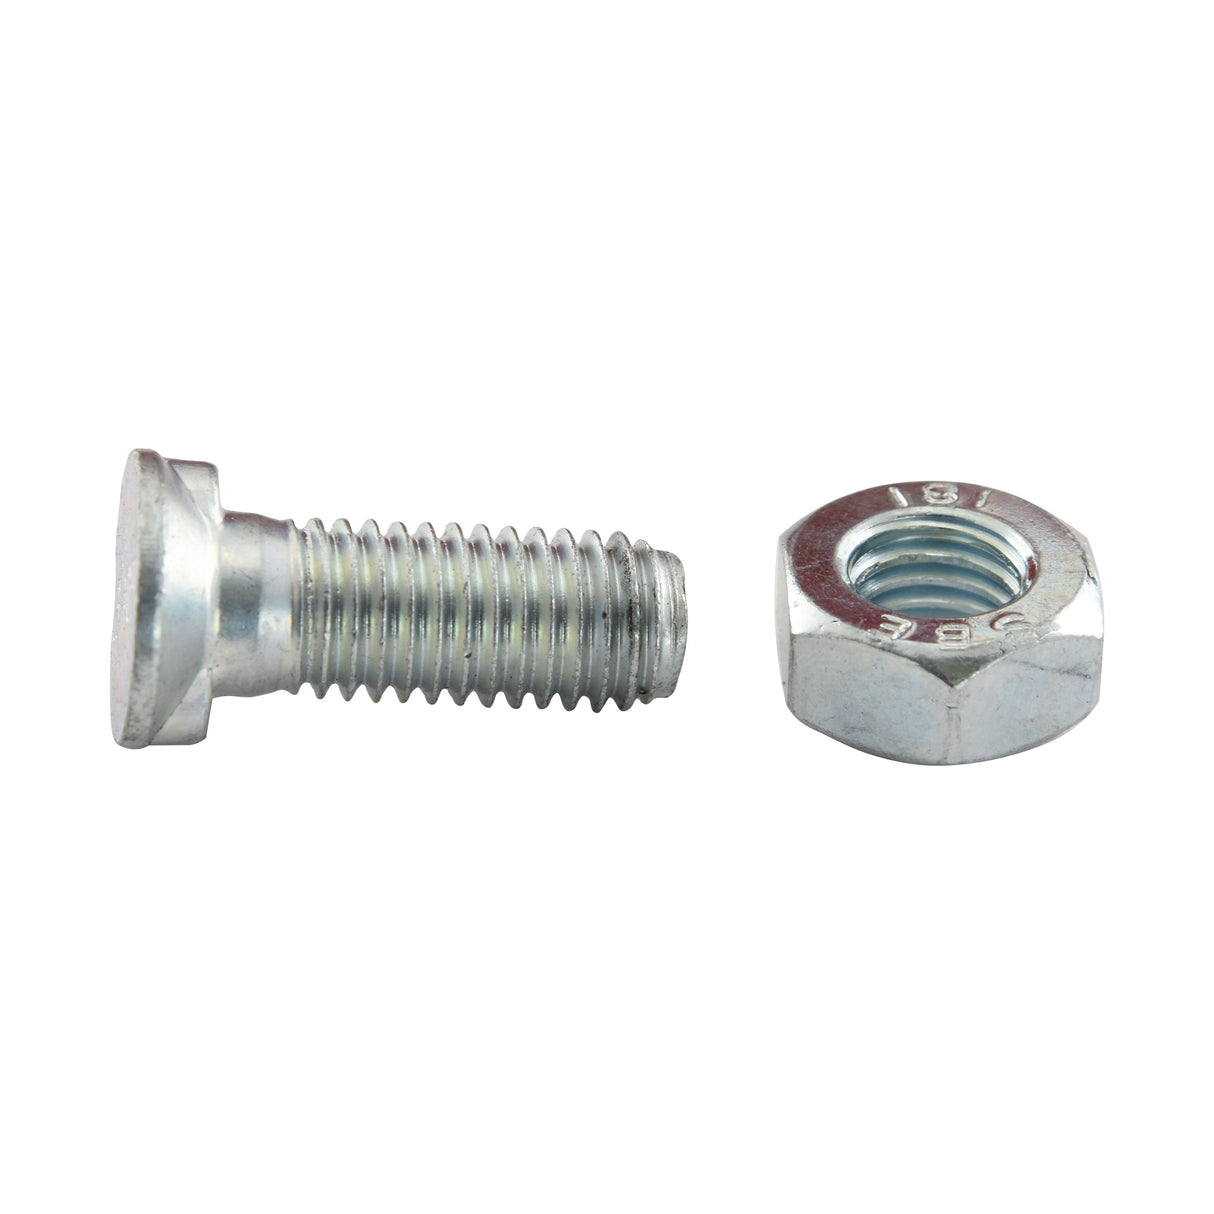 Countersunk Head Bolt 2 Nibs With Nut (TF2E) - M12 x 60mm, Tensile strength 8.8 (25 pcs. Box)
 - S.78810 - Farming Parts